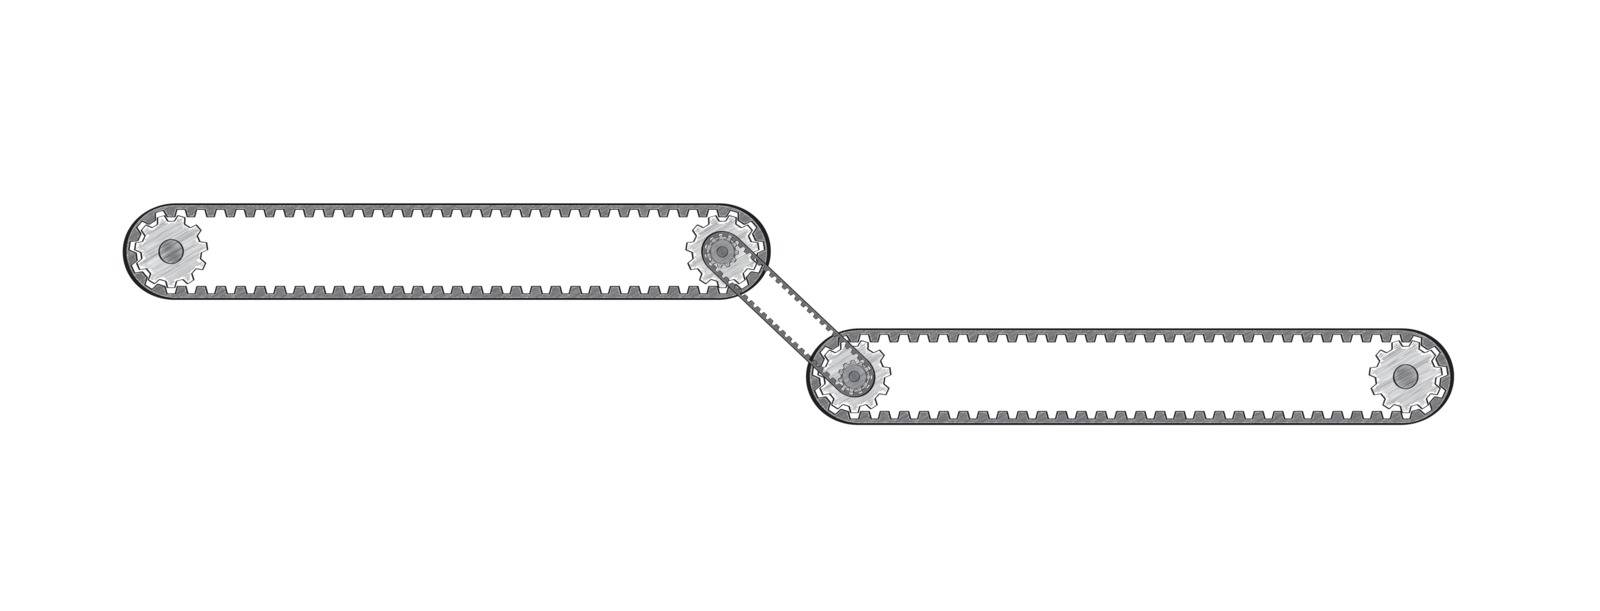 two connected conveyor belts with two cogwheels by muuraa